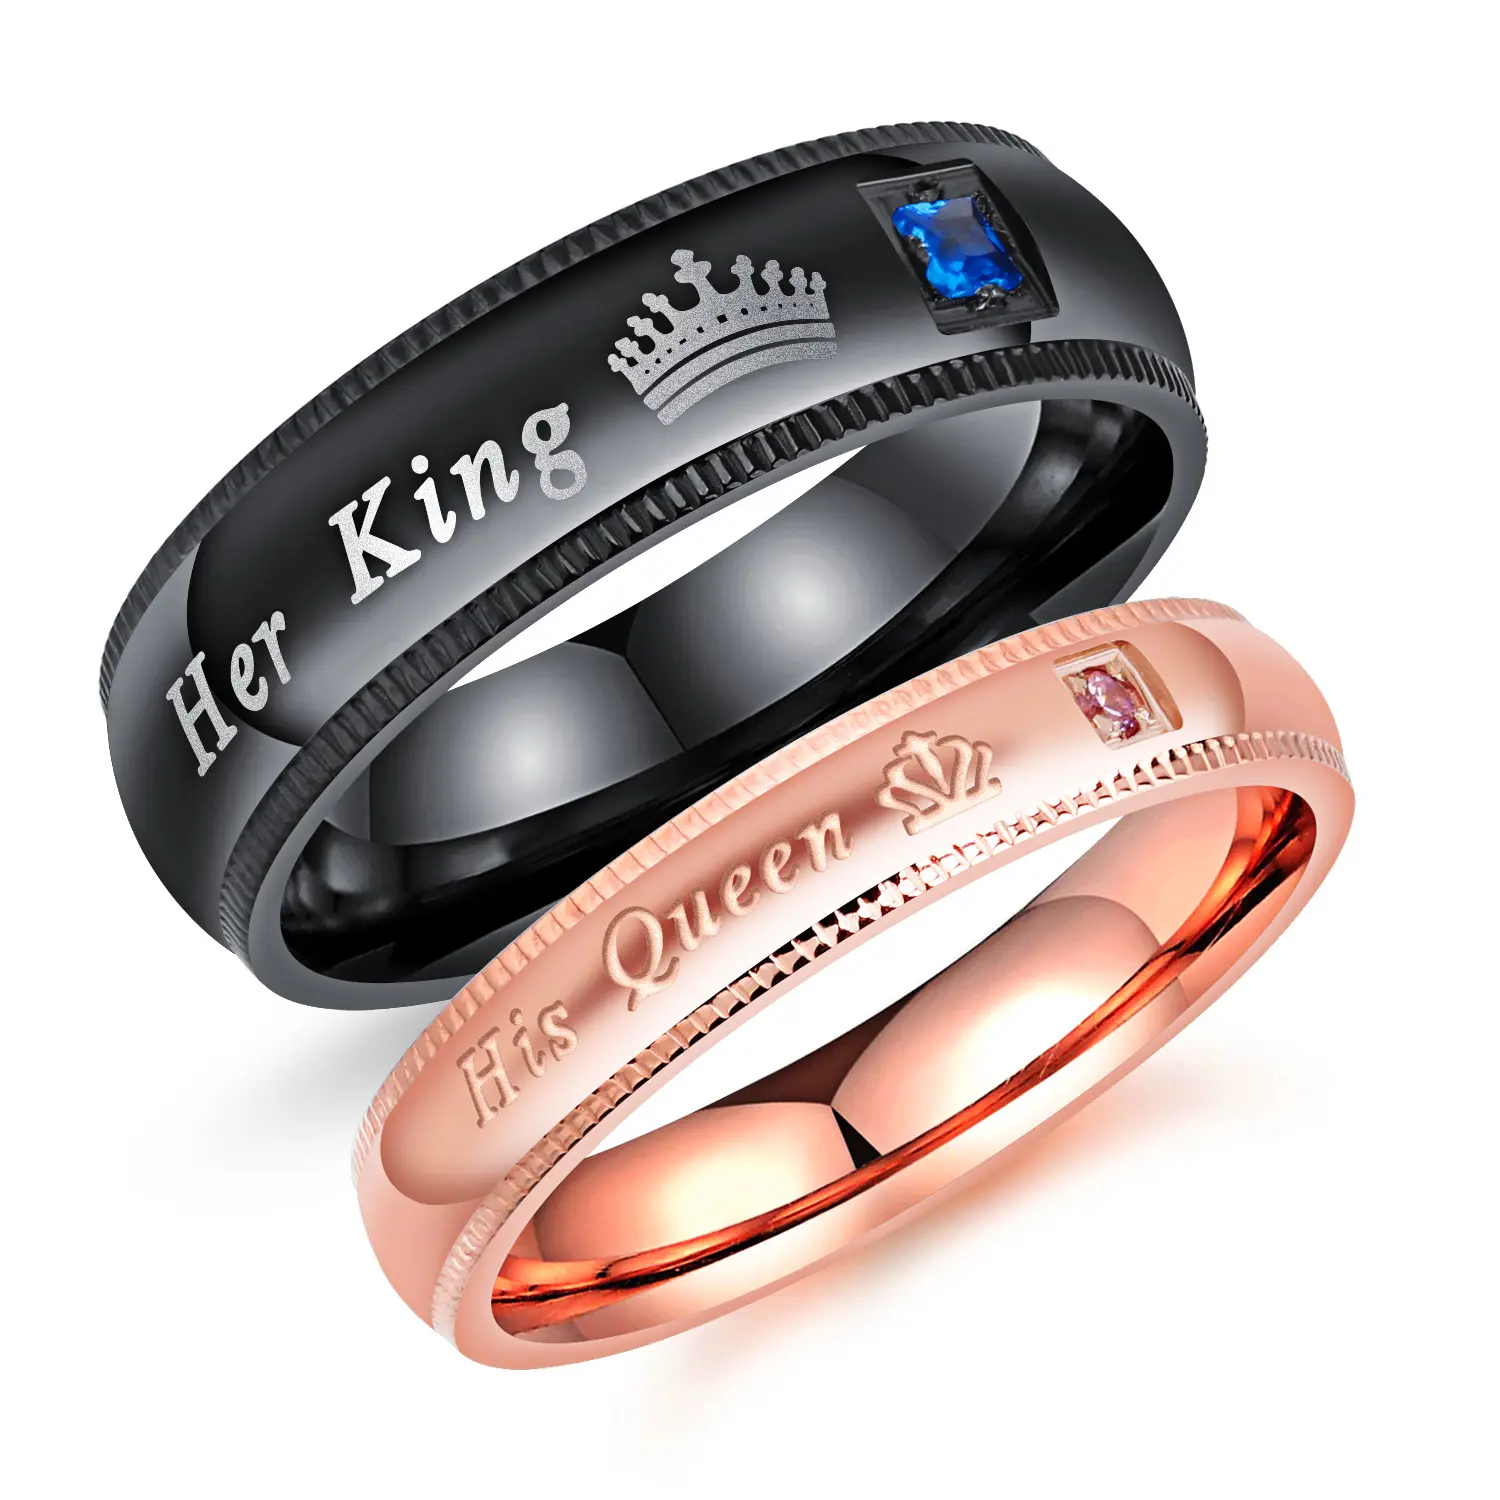 2 Pieces Men Women Titanium Stainless Steel His Queen Her King Couples Rings Set For Wedding Valentine Day Jewelry